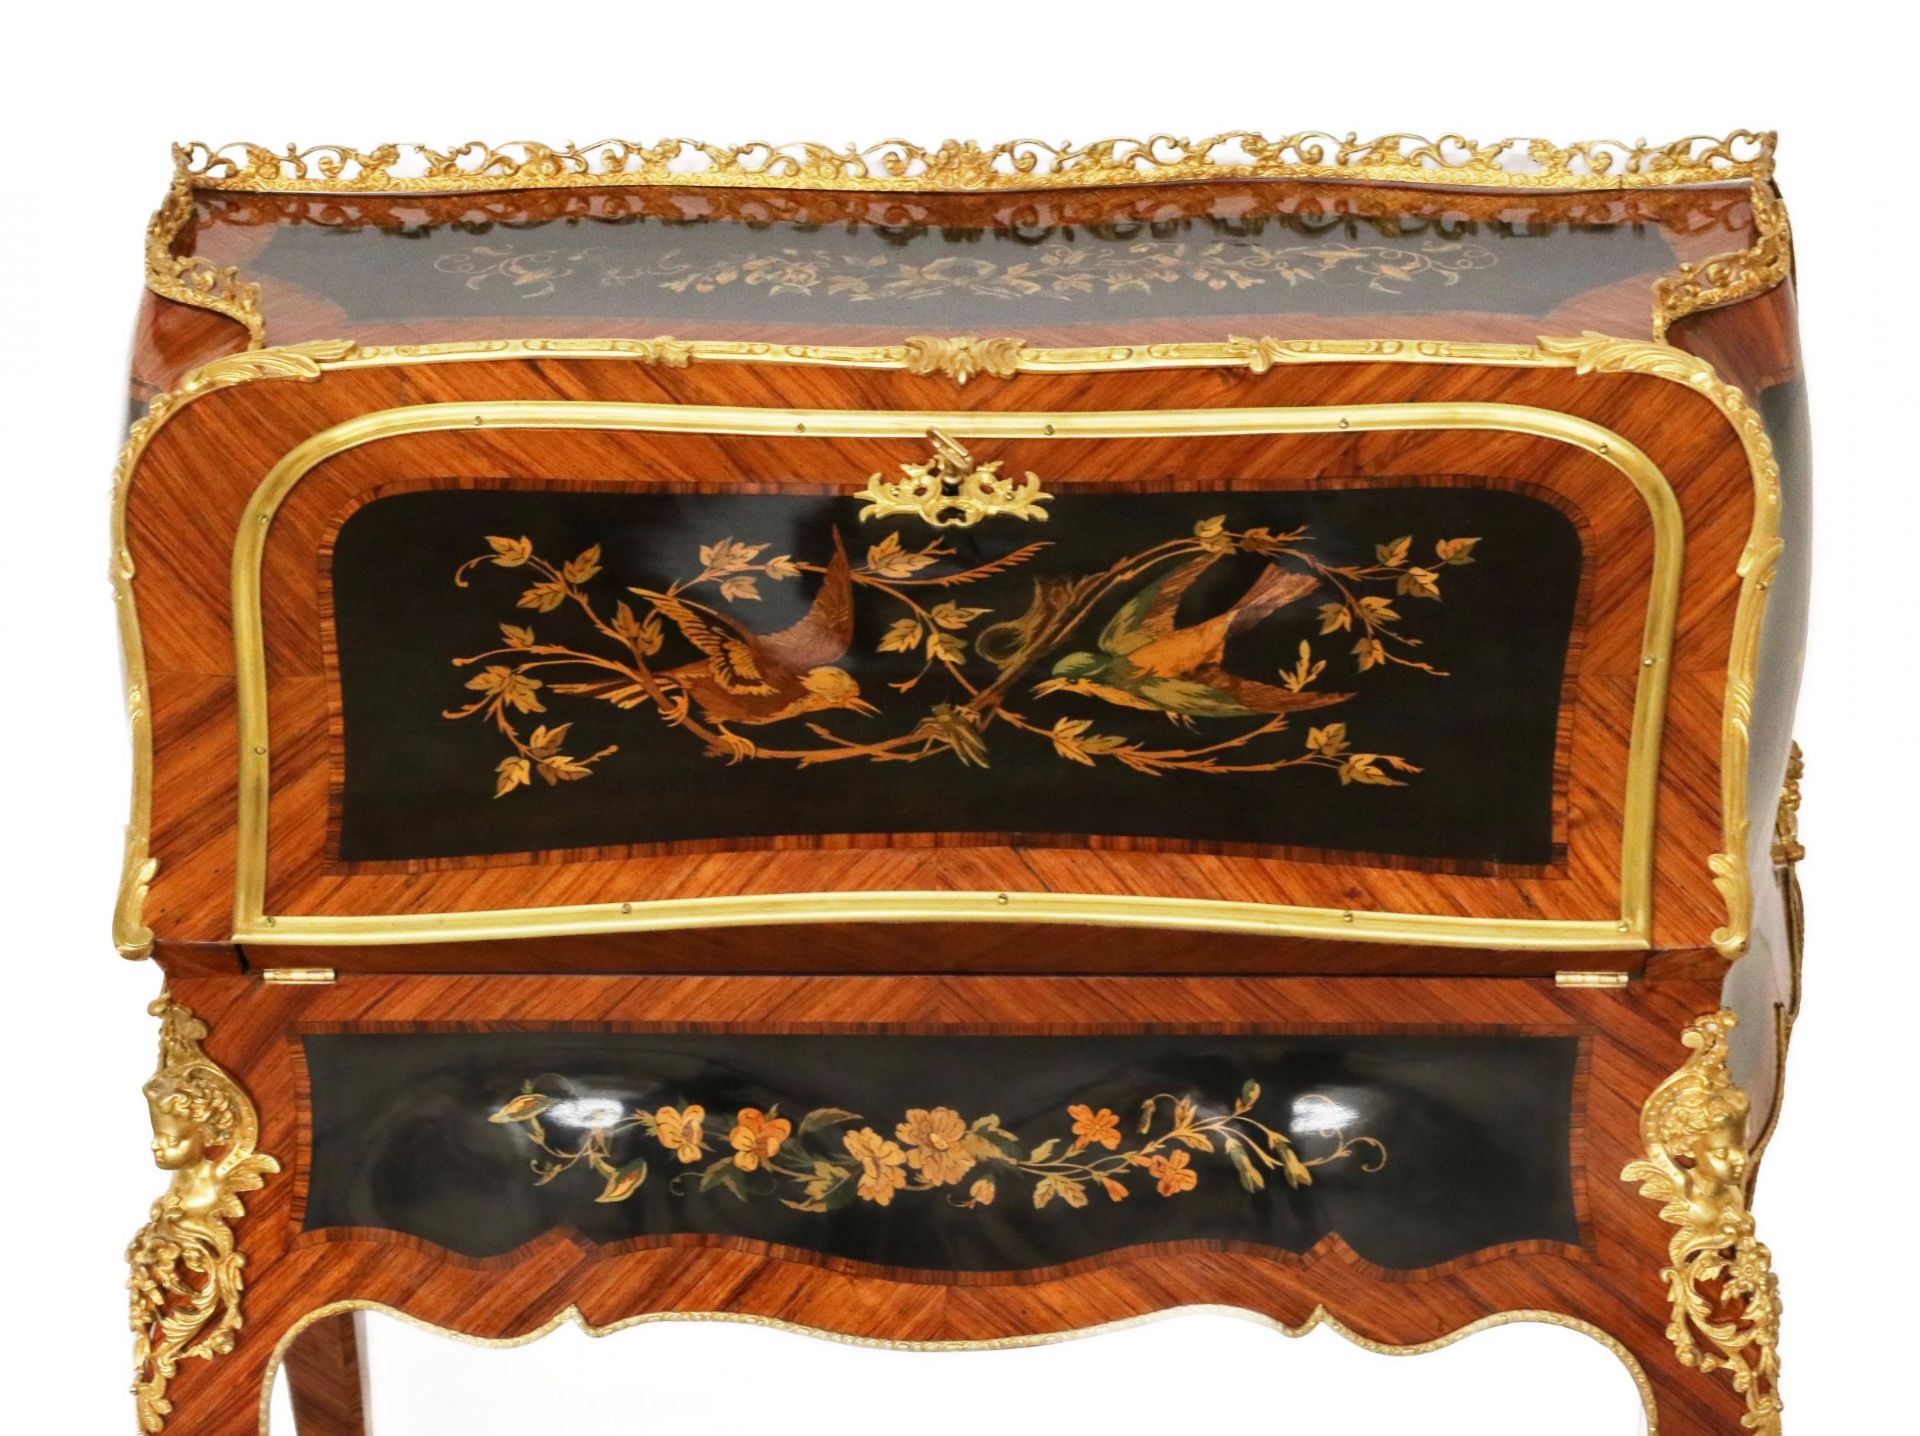 Coquettish ladies` bureau in wood and gilded bronze, Louis XV style. - Image 10 of 11